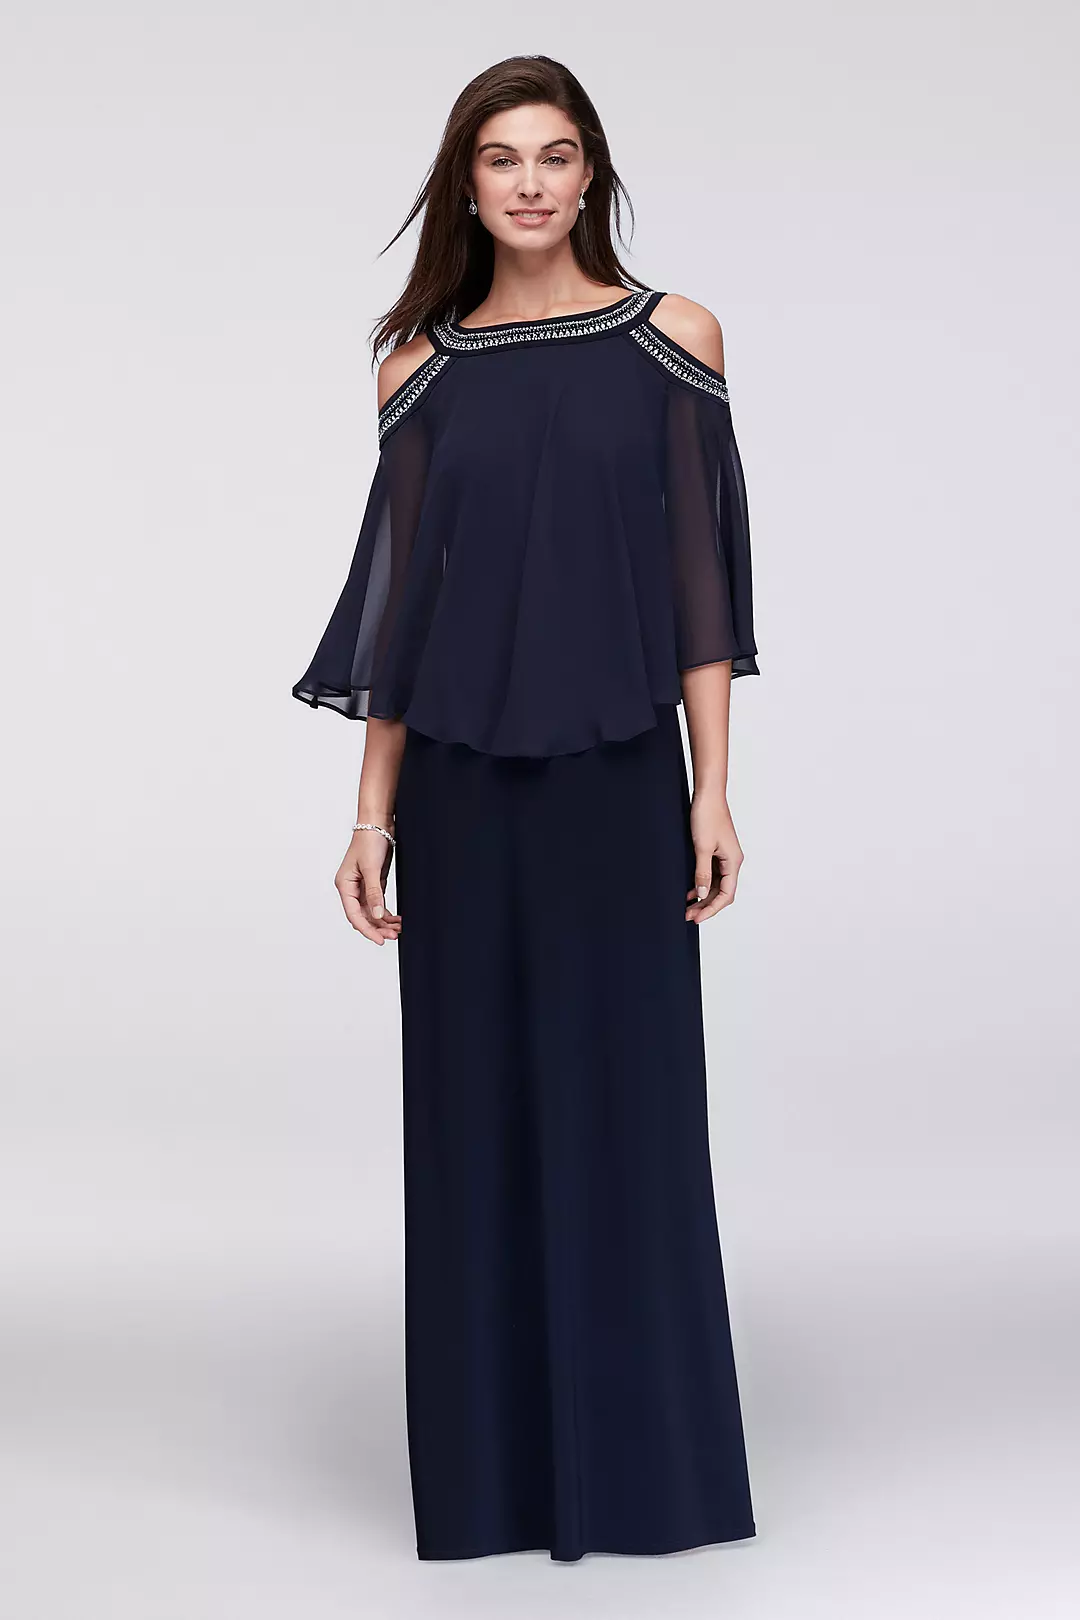 Cold Shoulder Capelet Dress with Beading Image